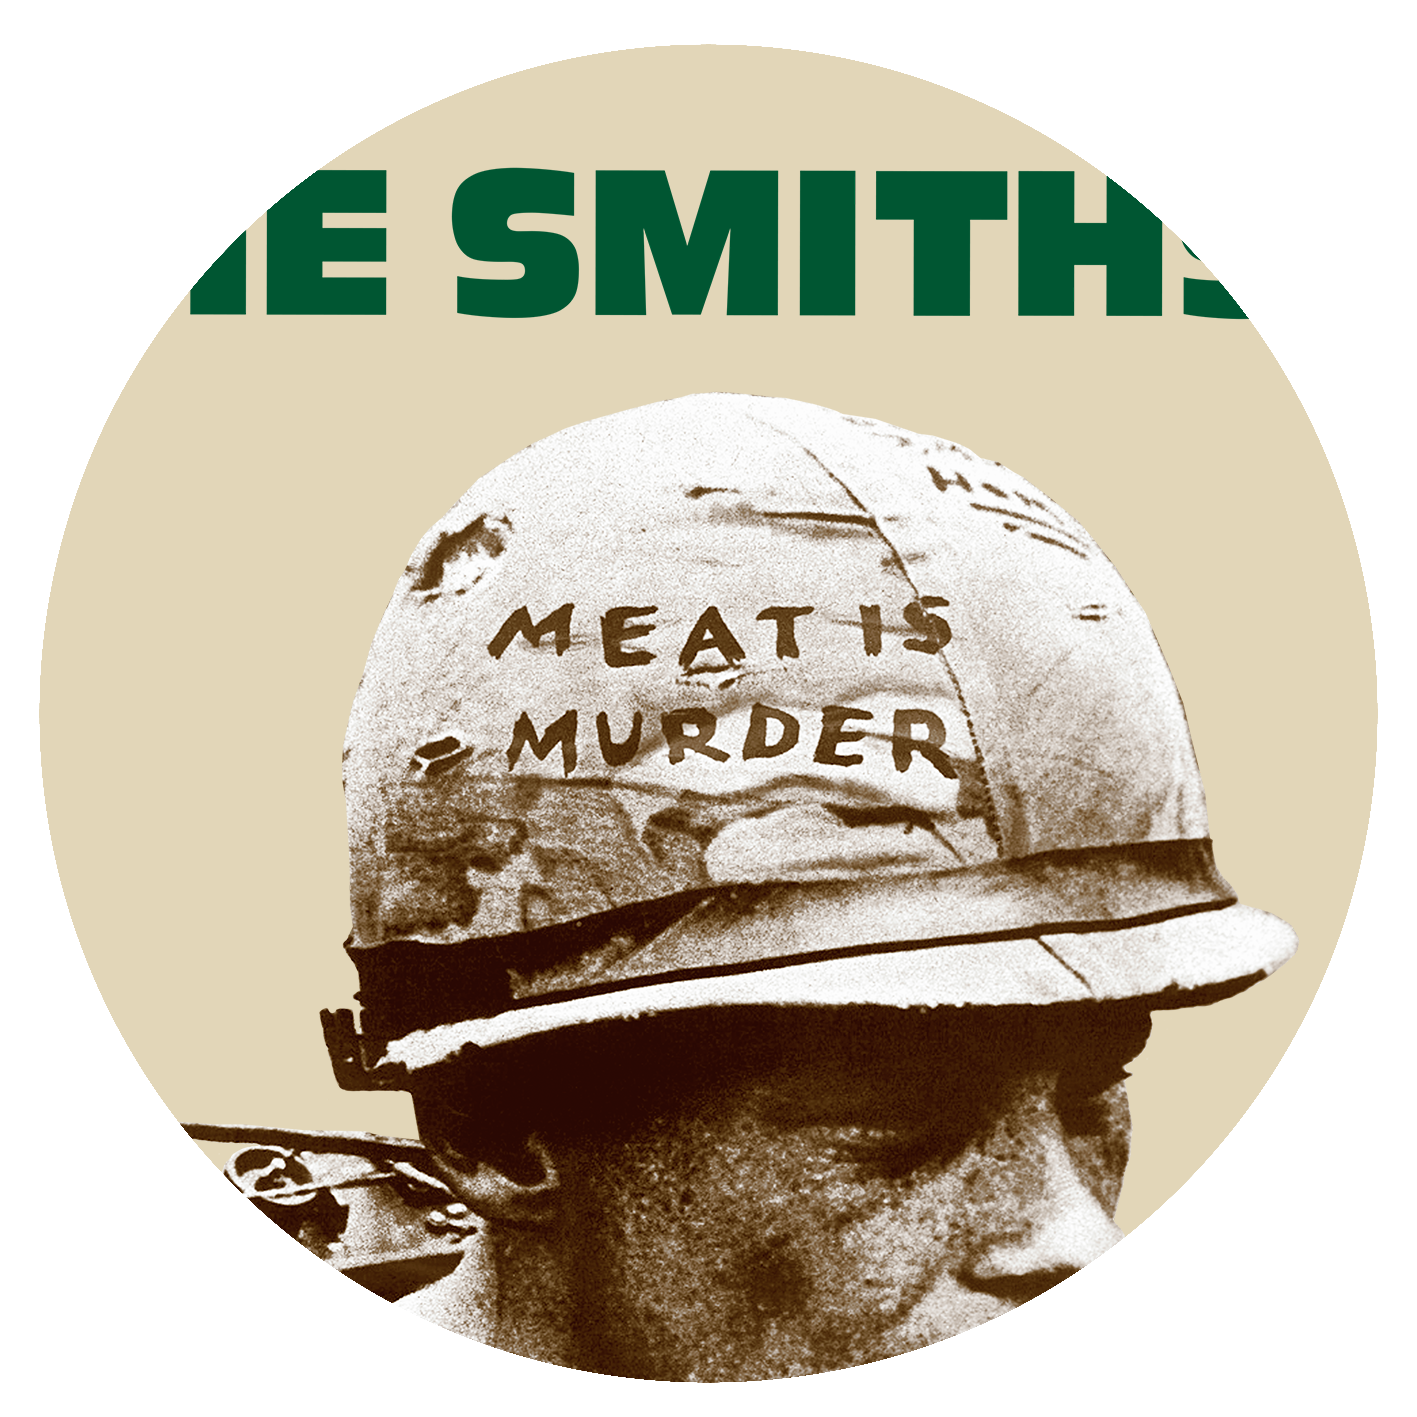 THE SMITHS - MEAT IS MURDER - Green Text - 'Butter' & 'Sage'